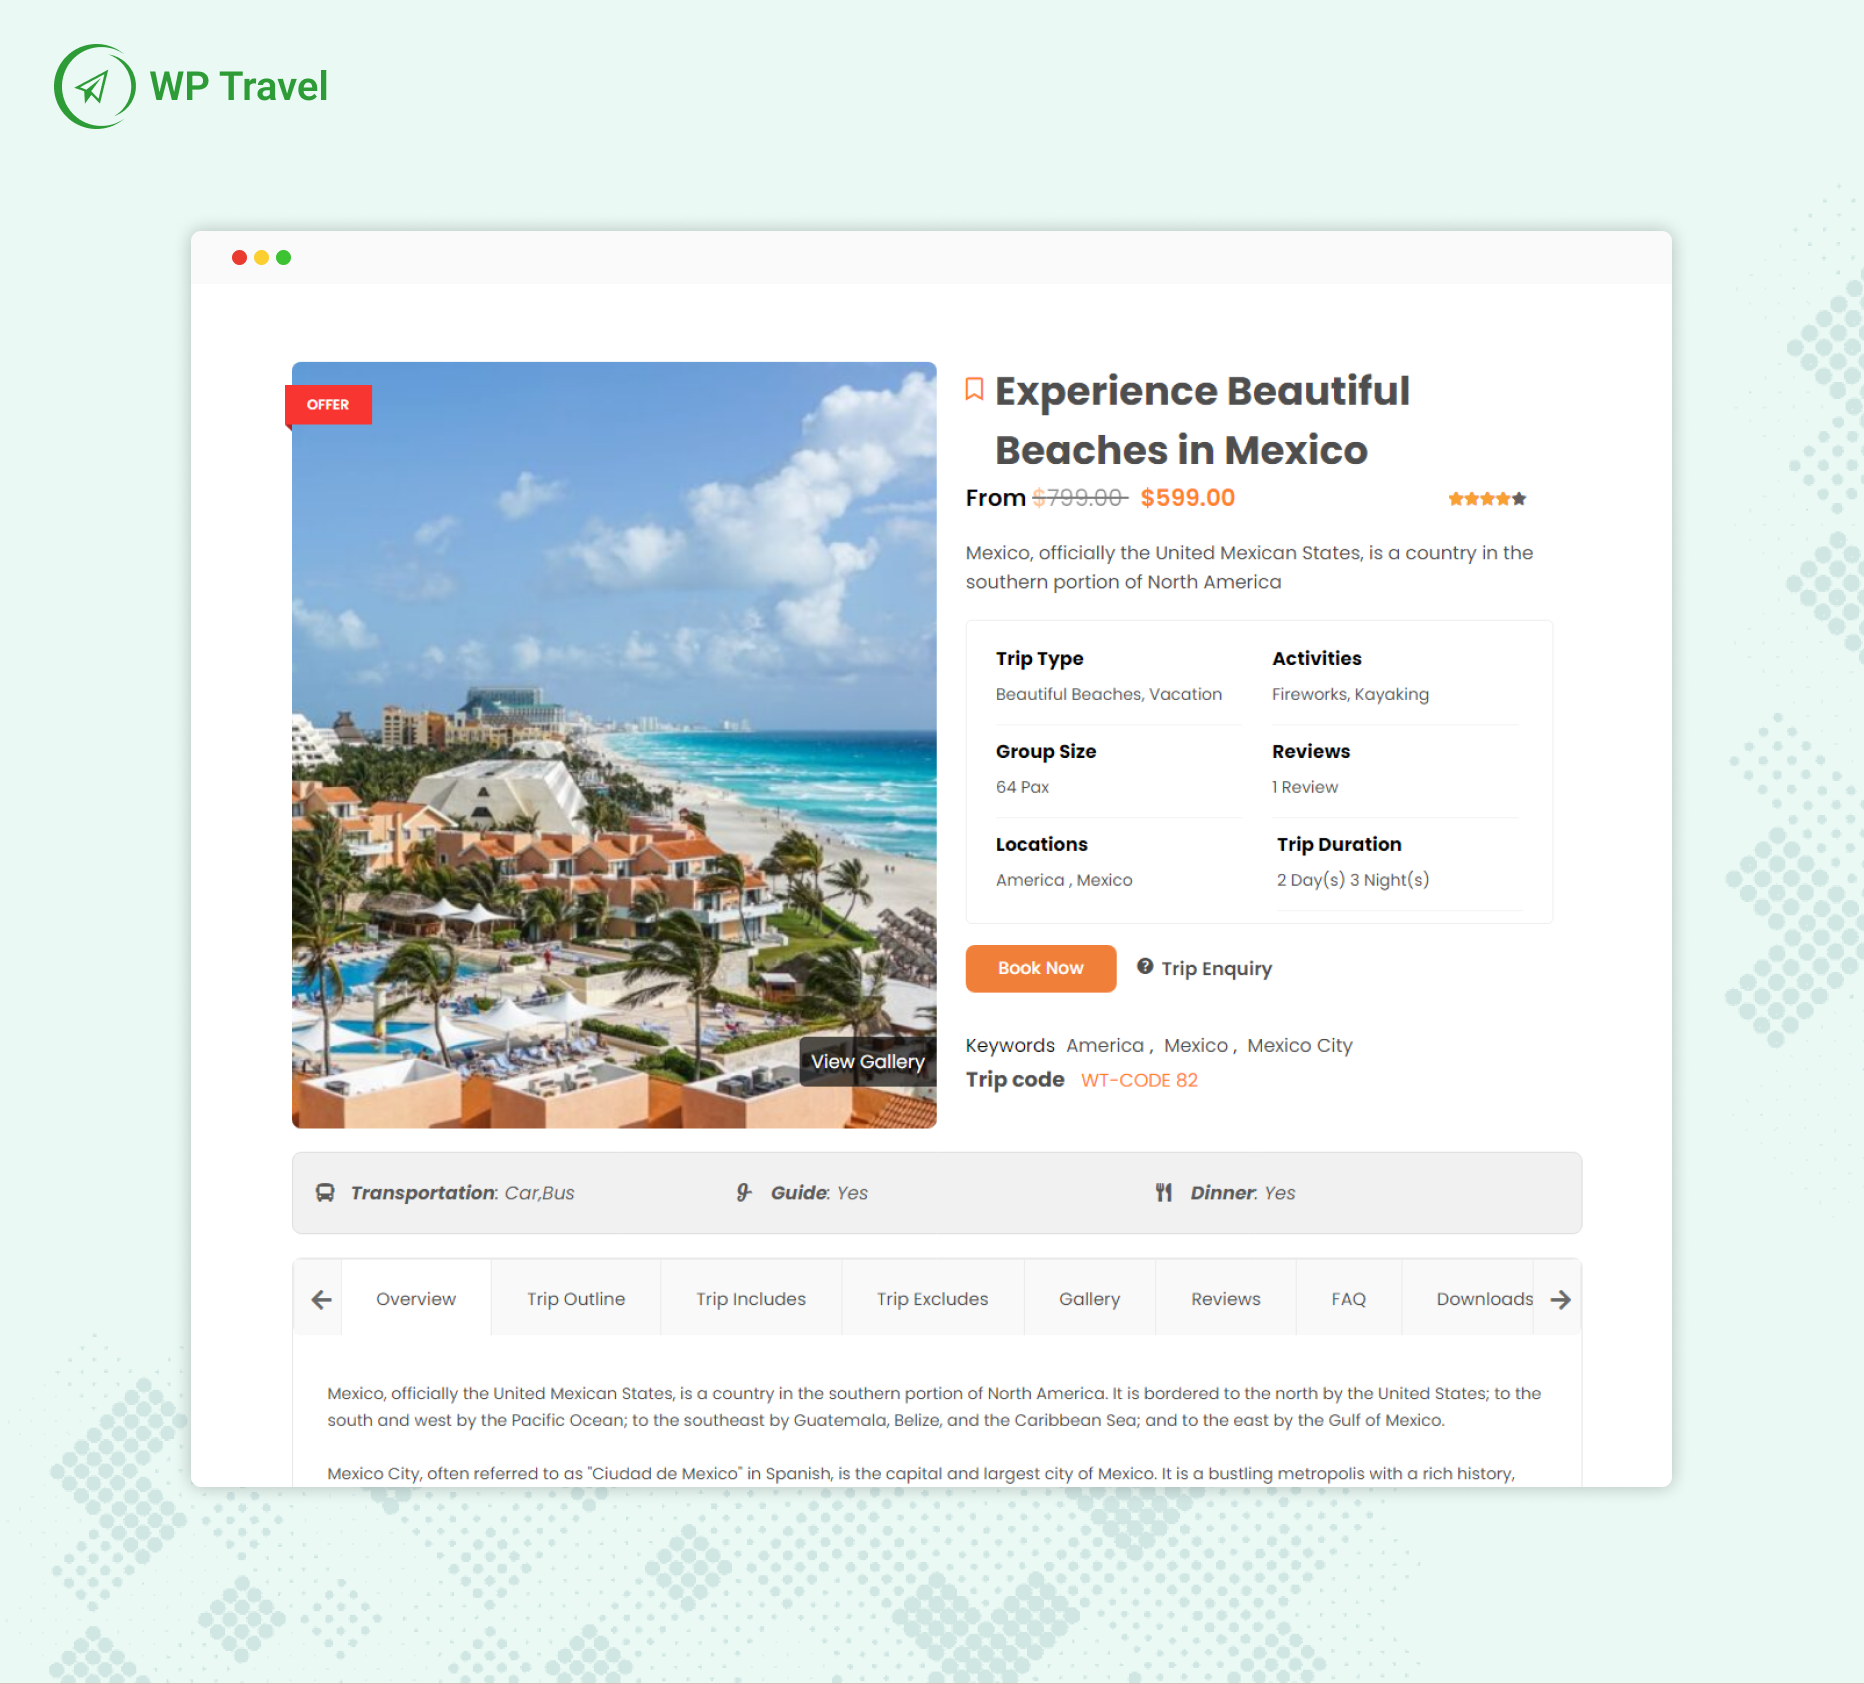 Frontend: On-Page Trip Booking